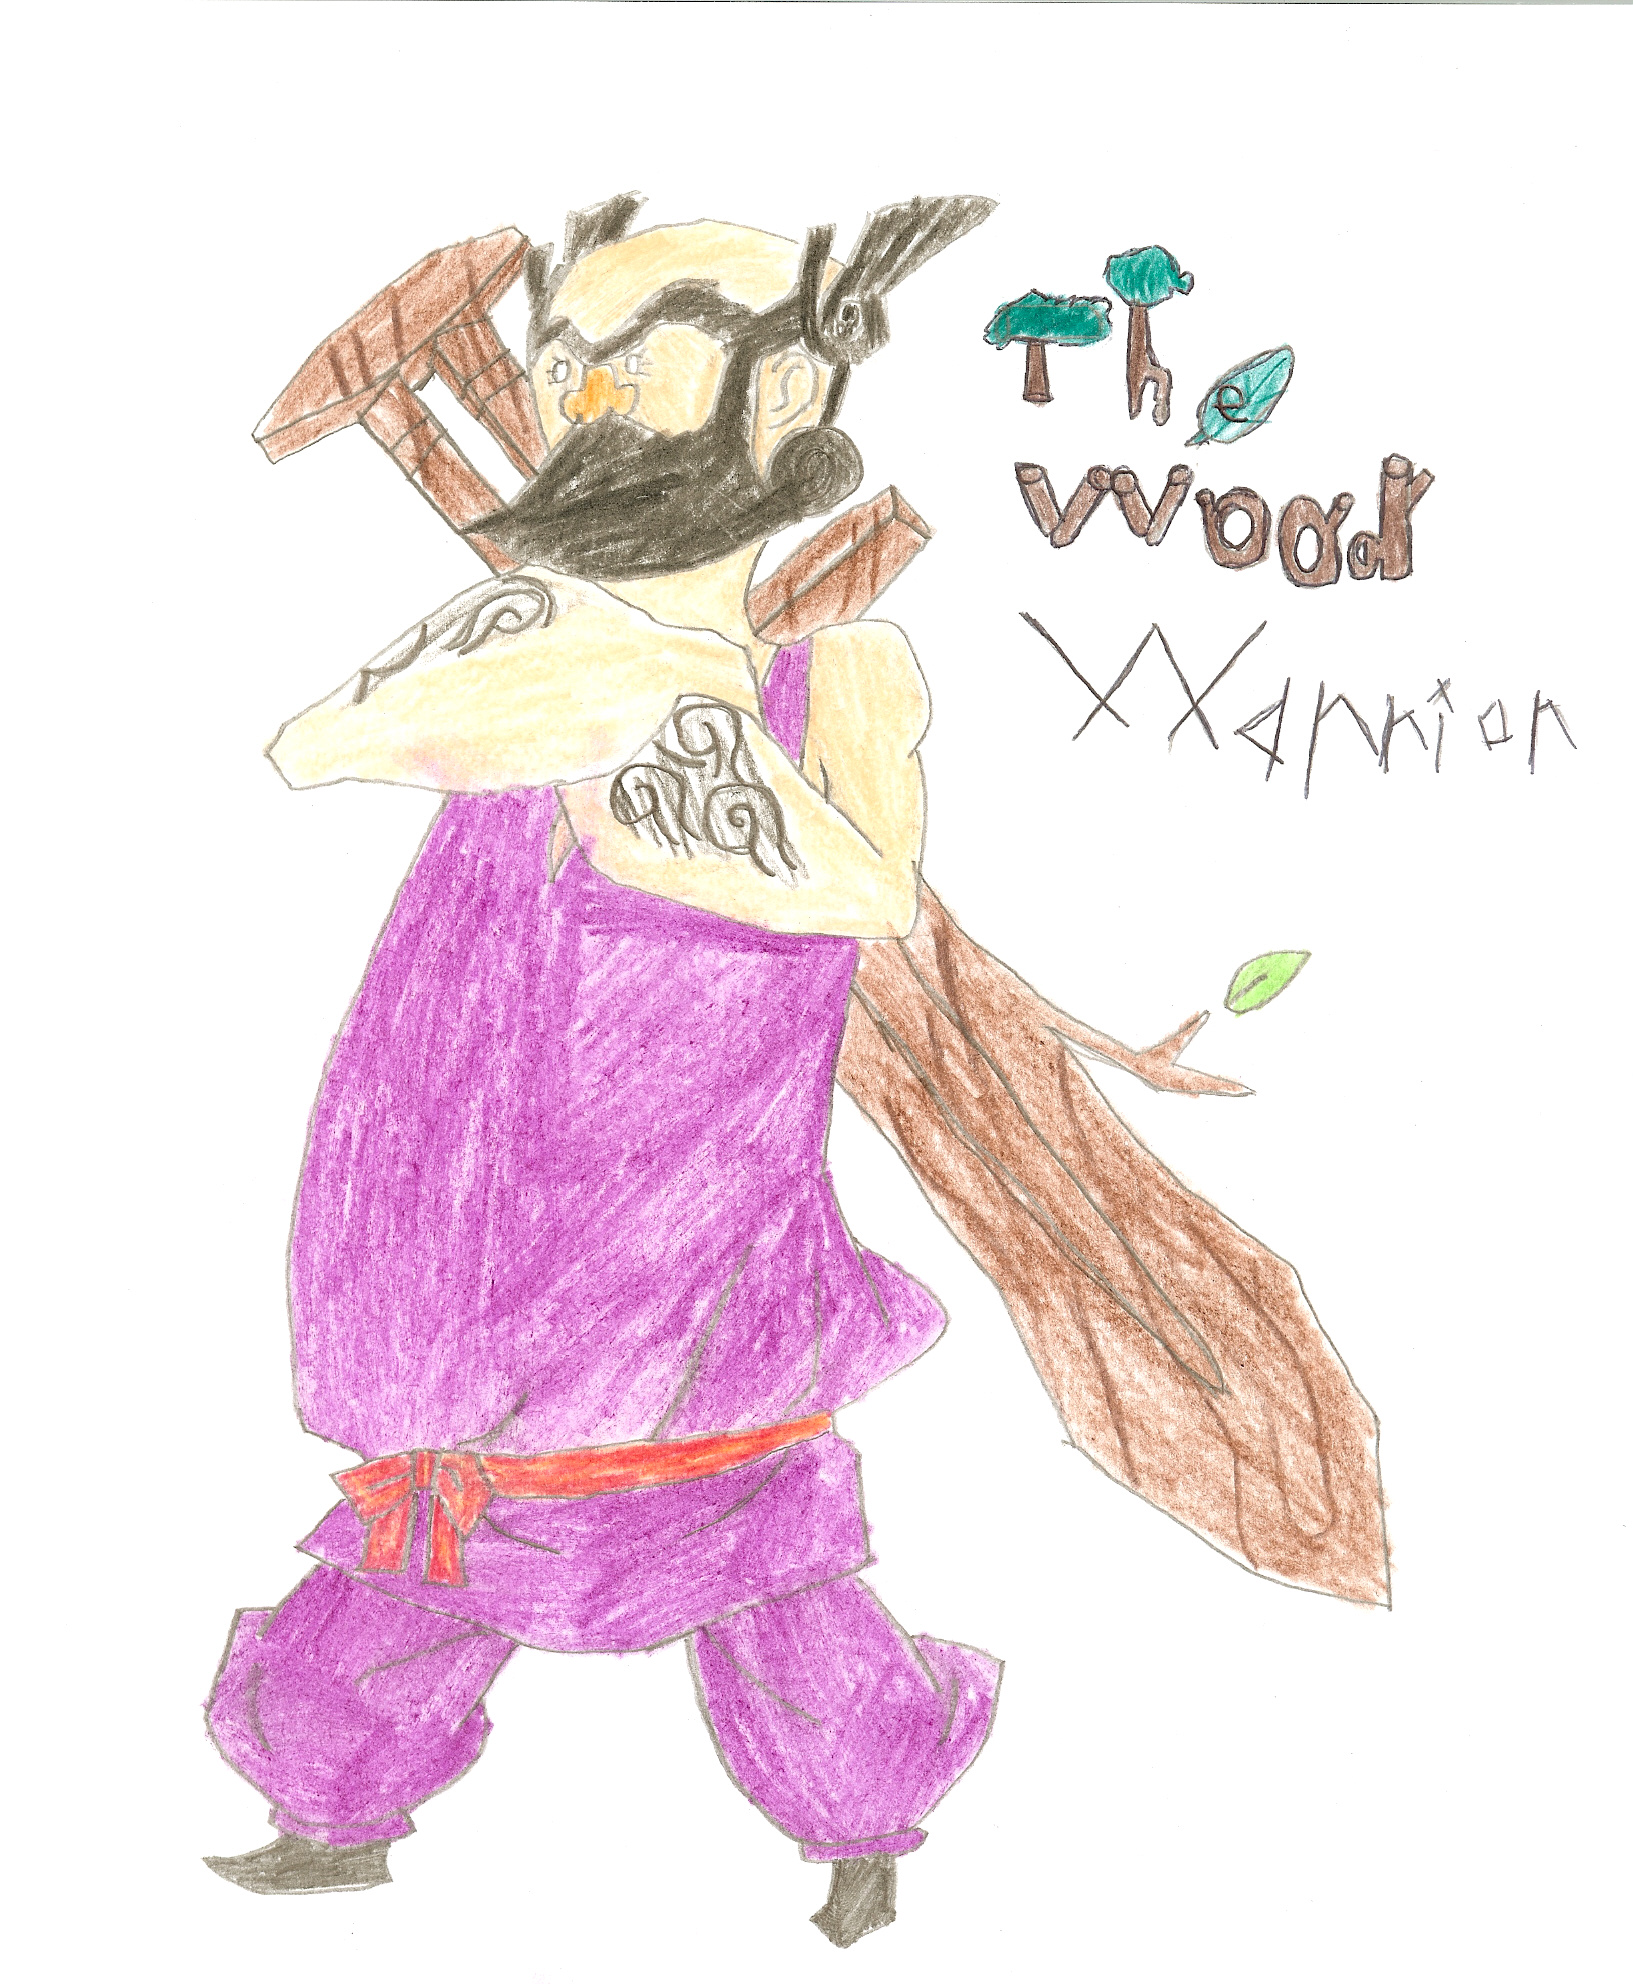 The Wood Warrior by Biolord42